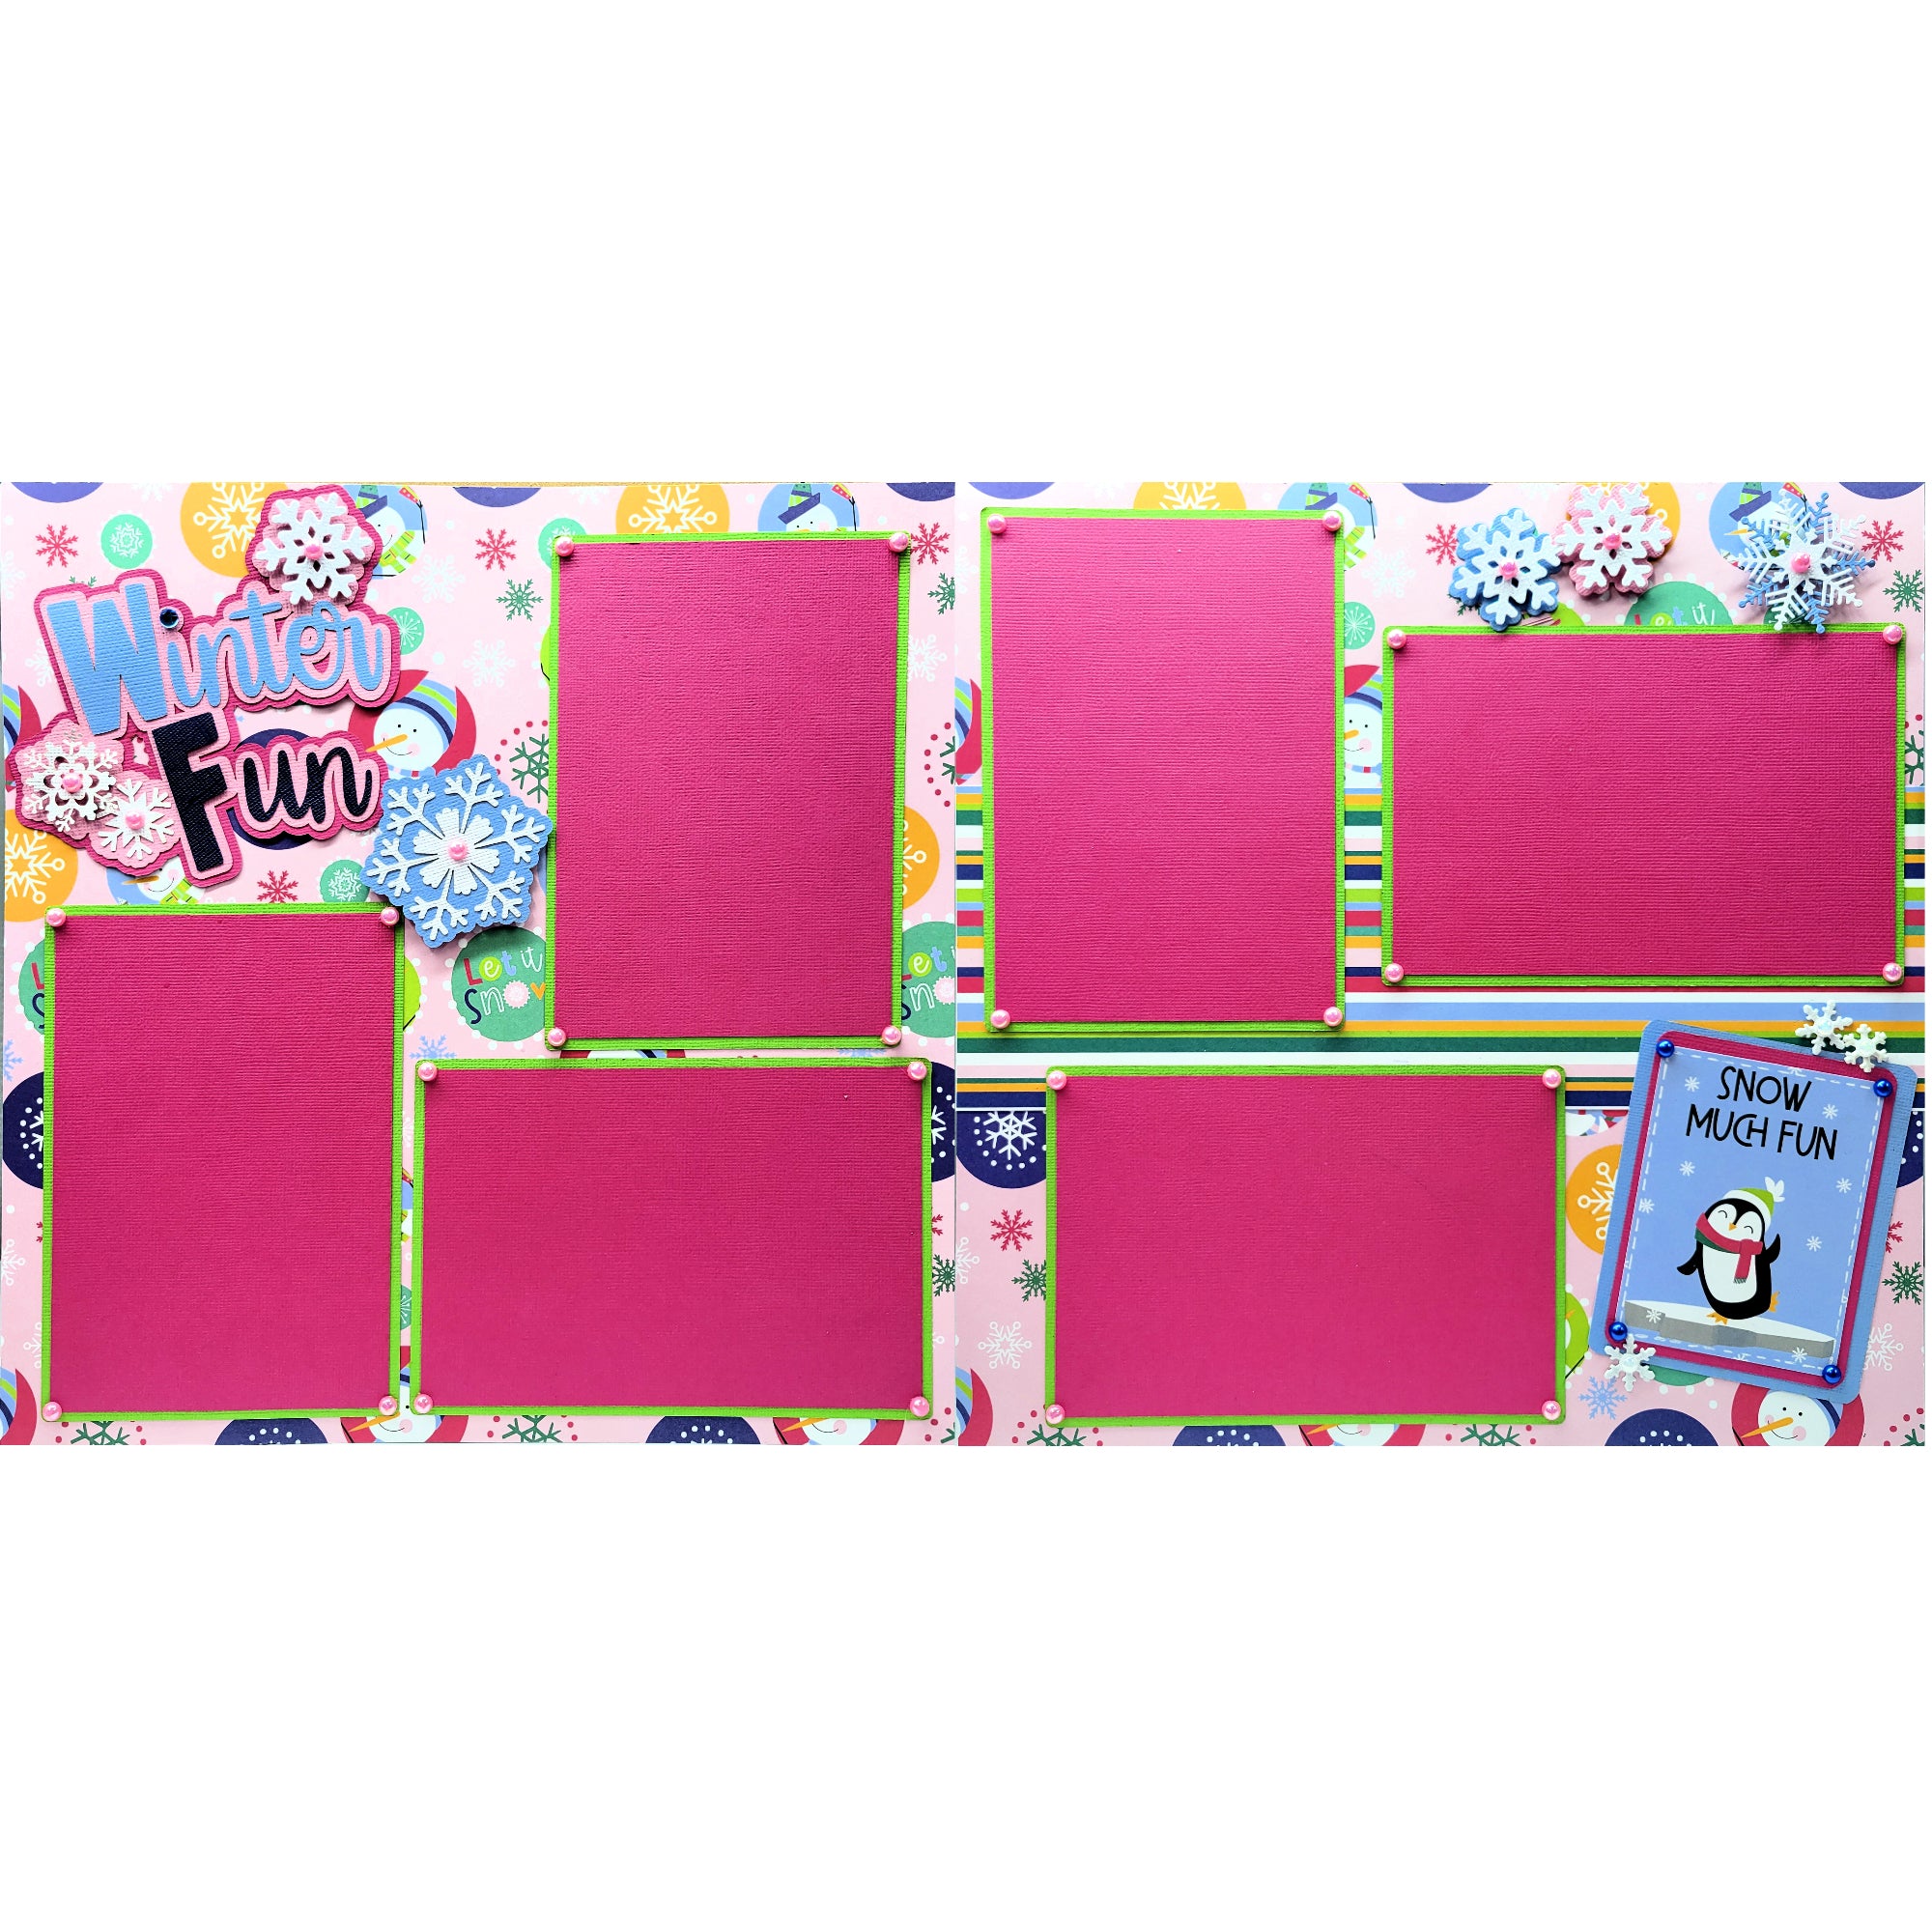 Winter Fun (2) - 12 x 12 Pages, Fully-Assembled & Hand-Crafted 3D Scrapbook Premade by SSC Designs